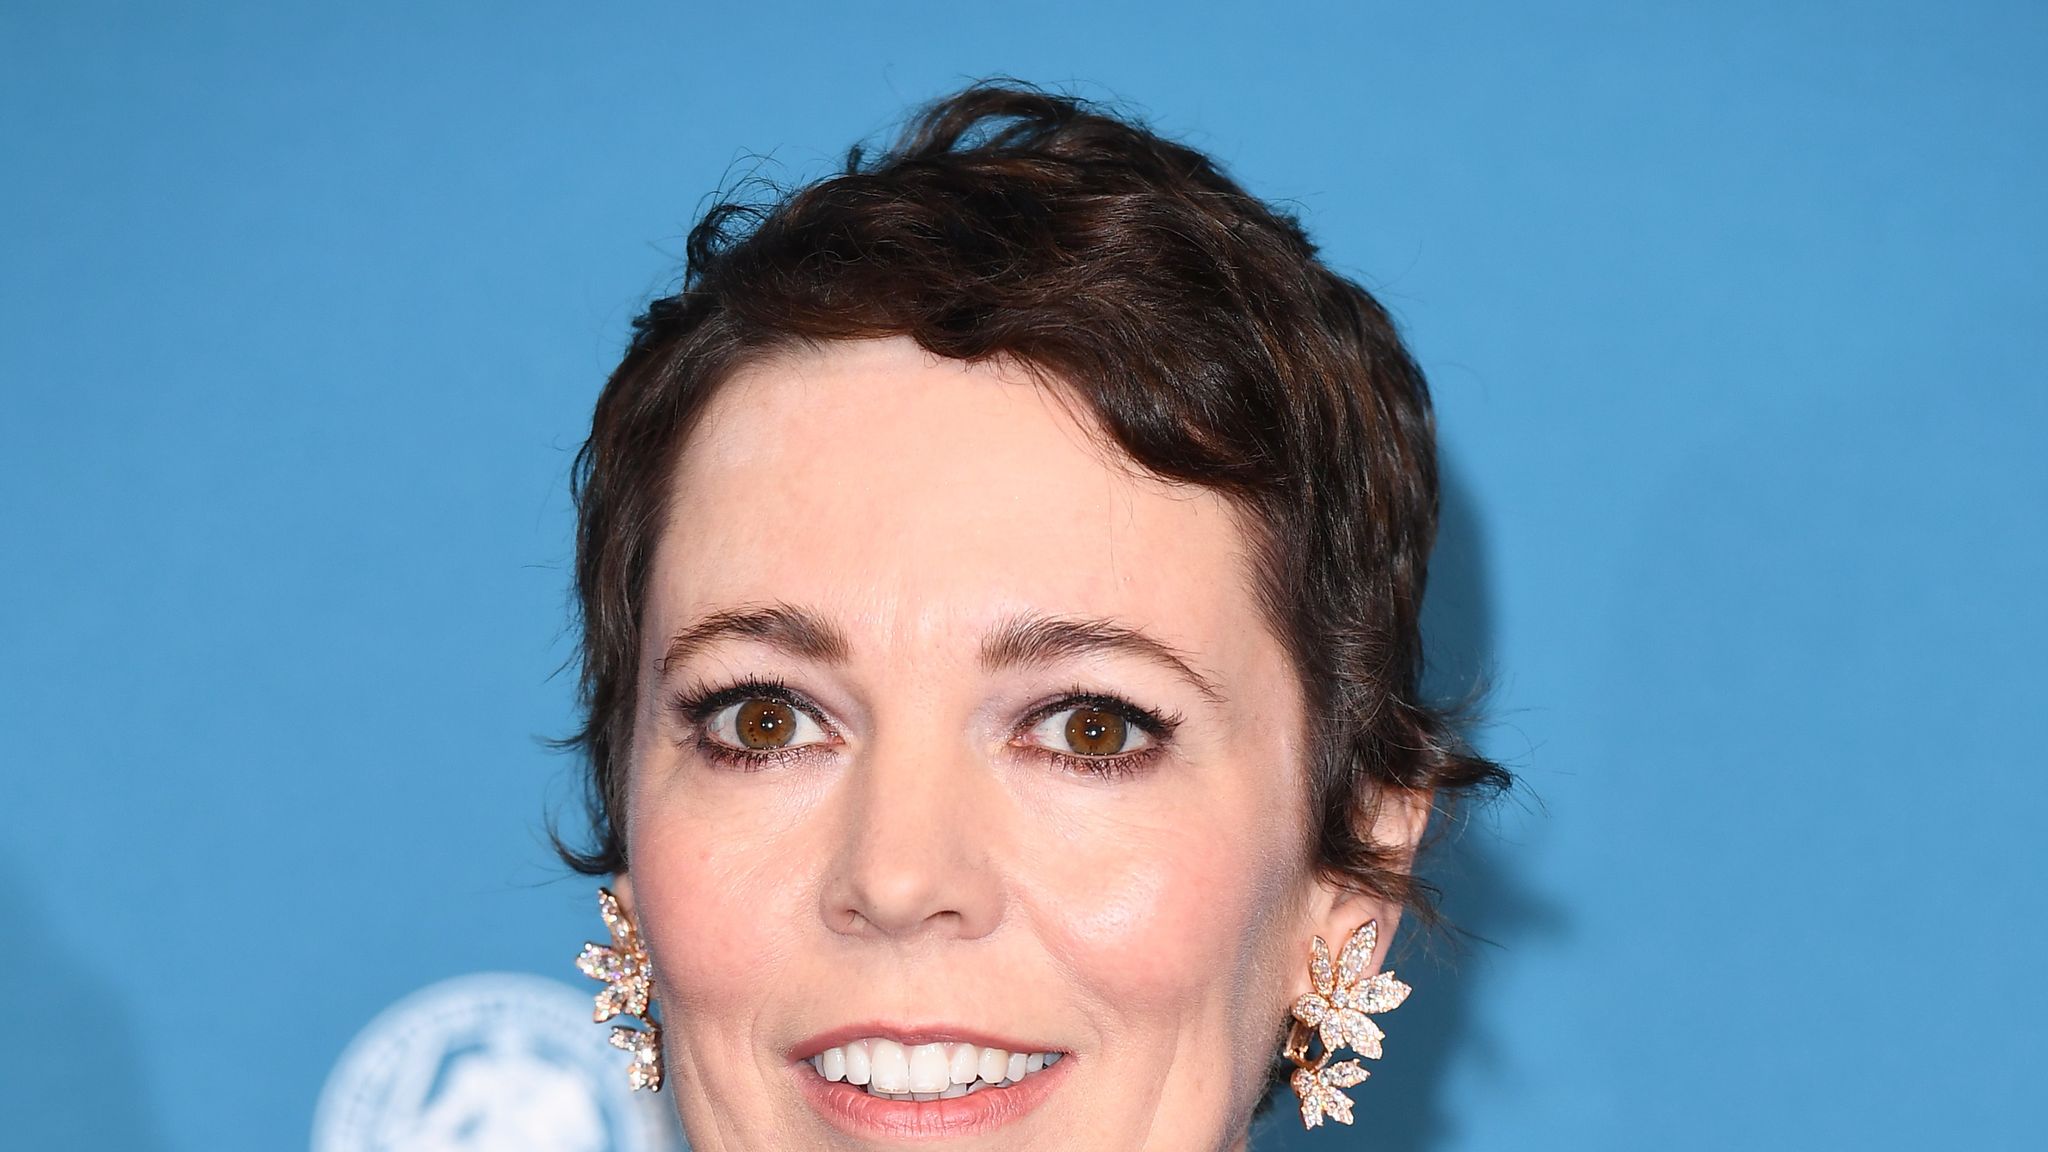 Olivia Colman reveals battle with Wikipedia over her age | Ents & Arts News | Sky News